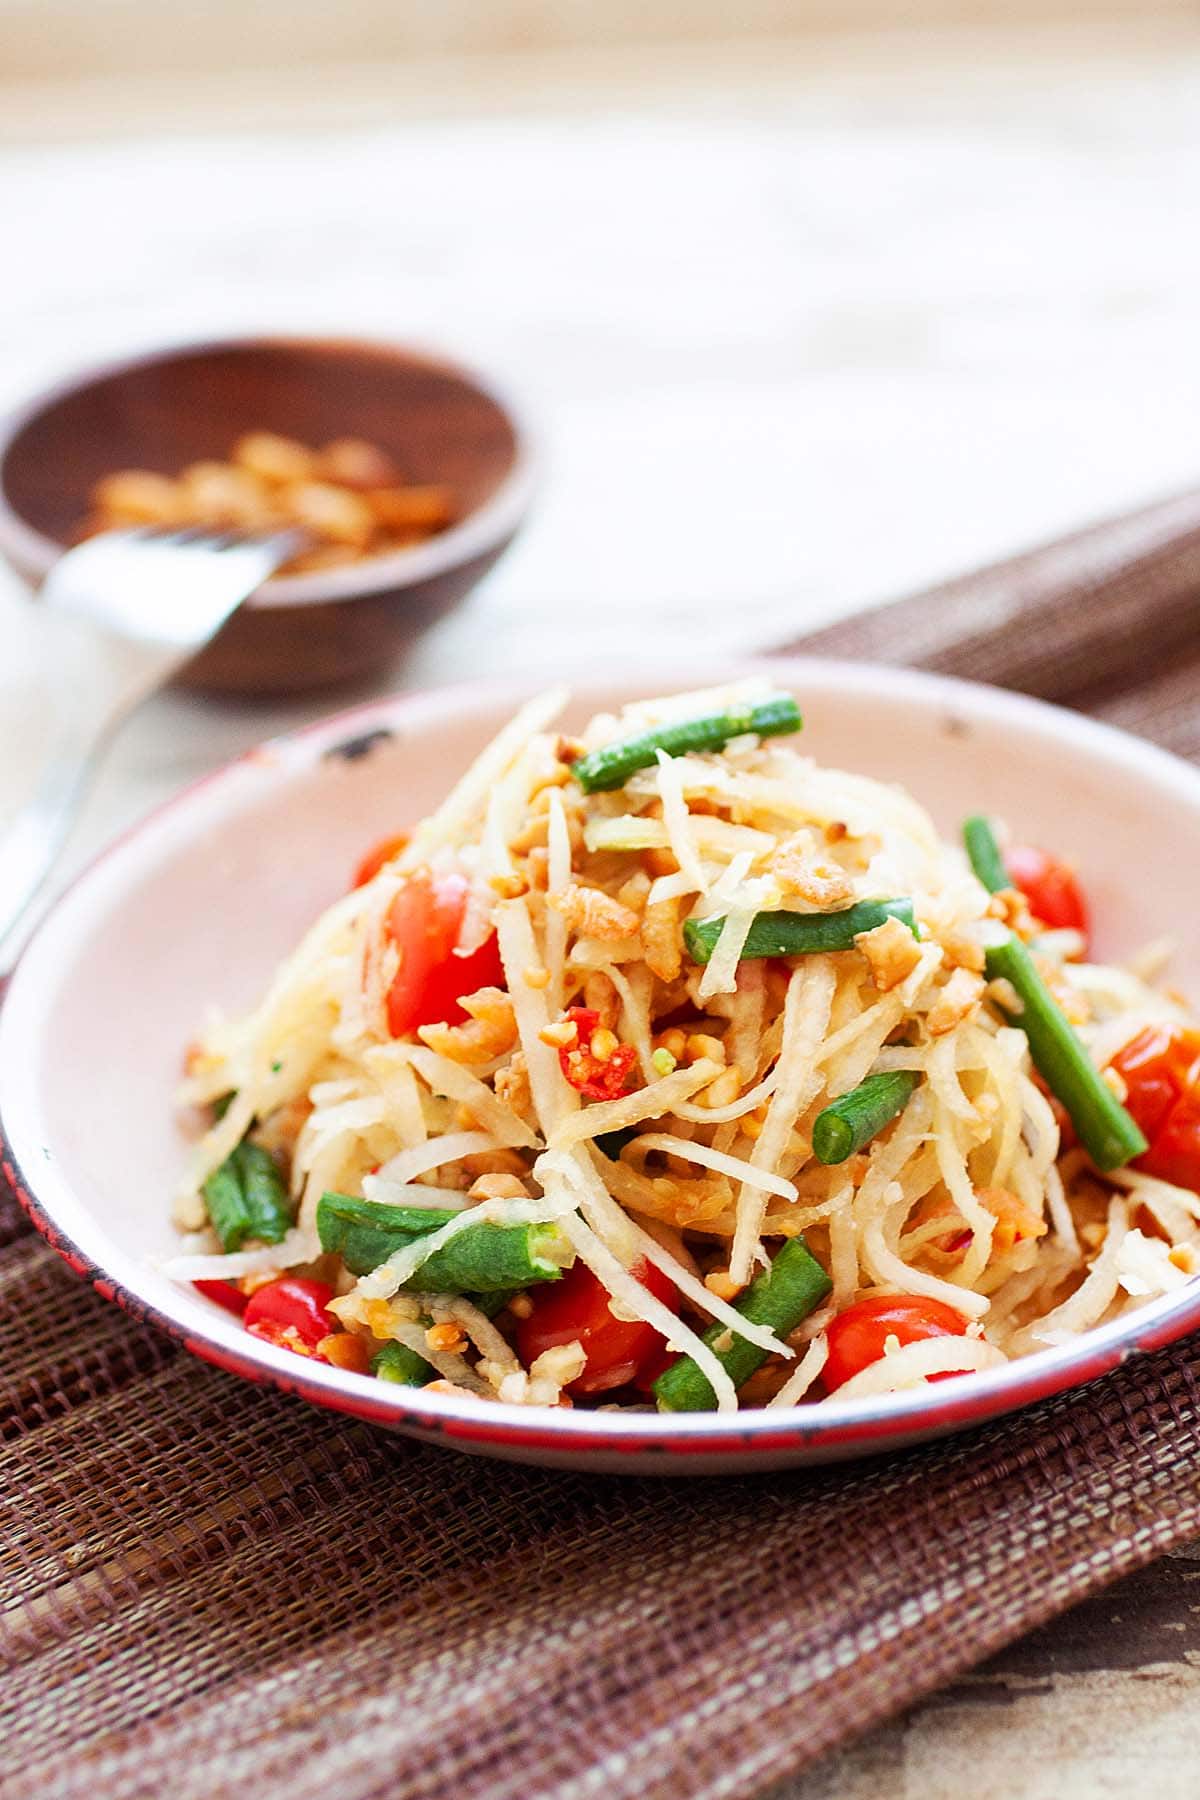 Spicy papaya salad with dried shrimp and Thai salad dressing on plate.  